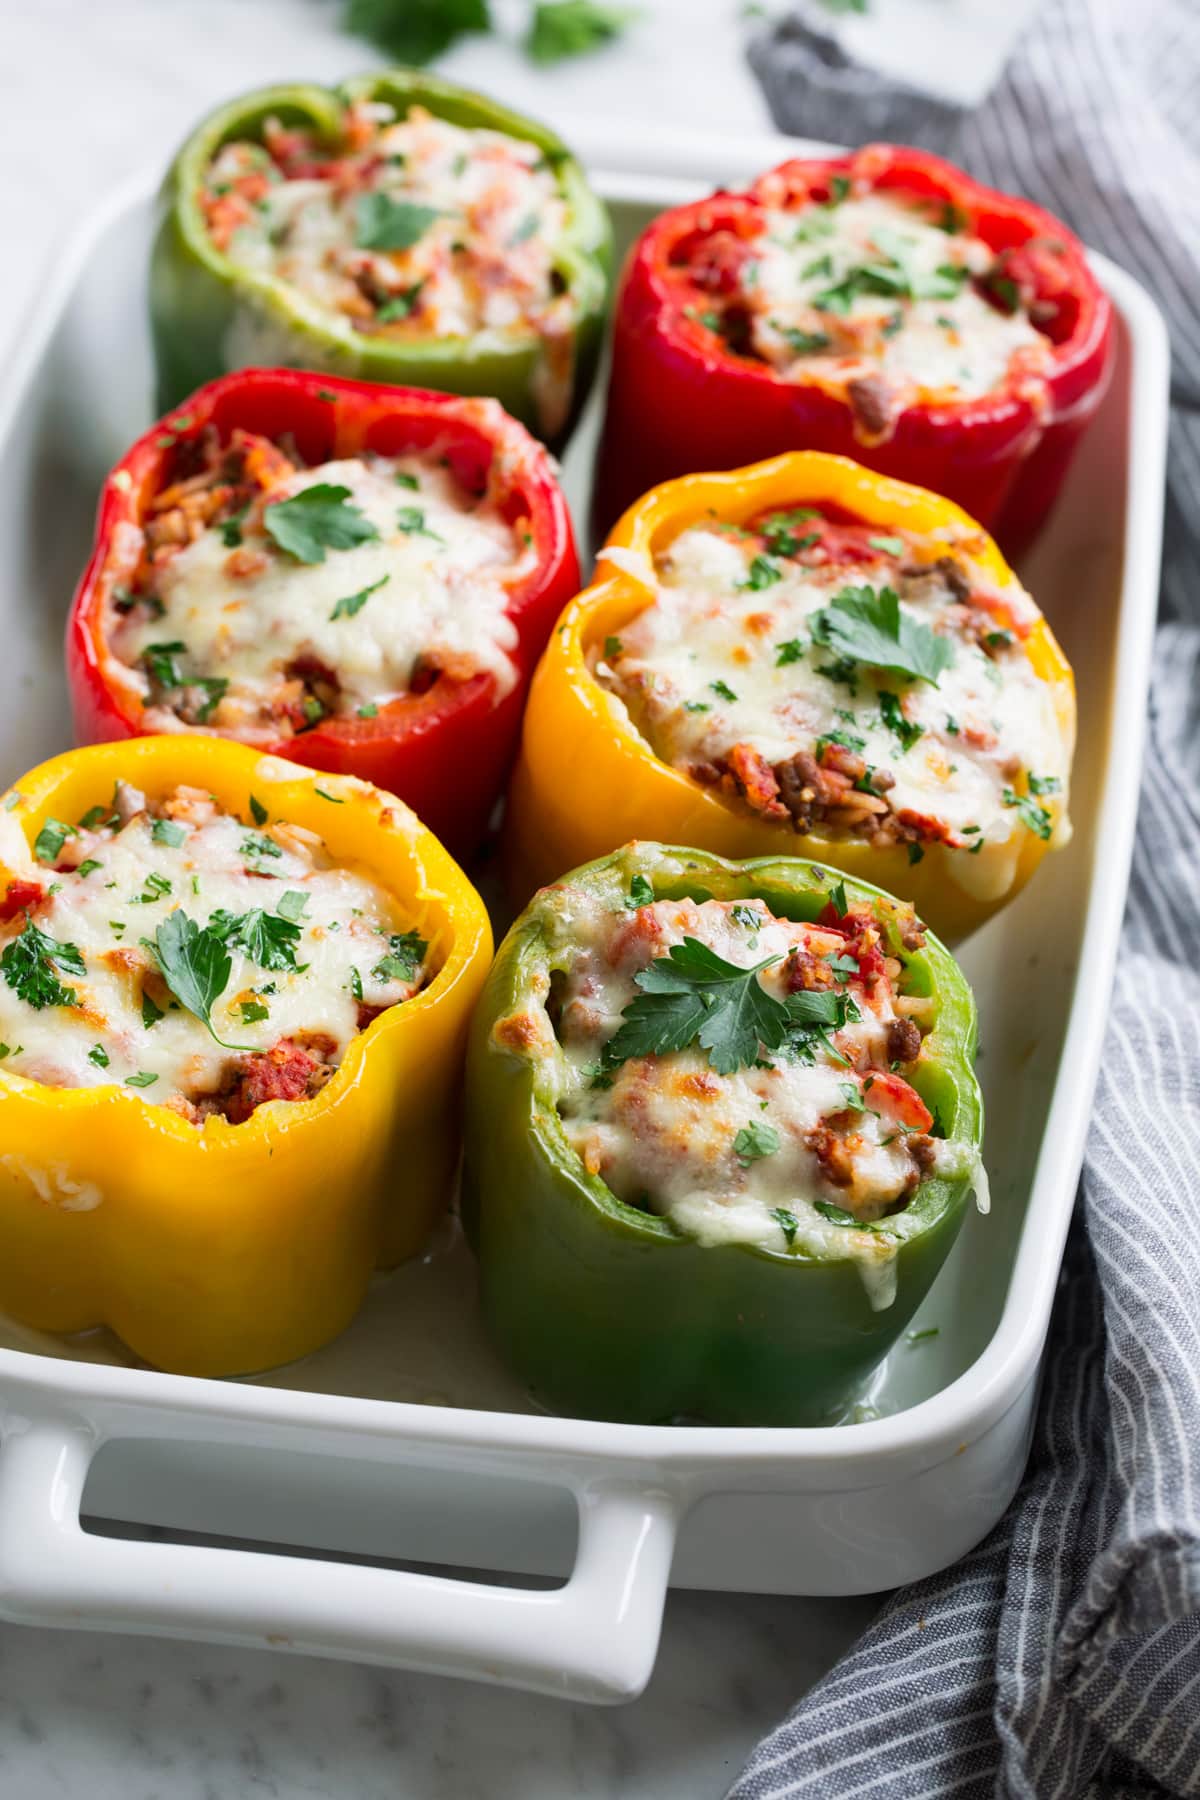 Stuffed Peppers Recipe Cooking Classy,Mexican Cornbread Recipe With Jiffy